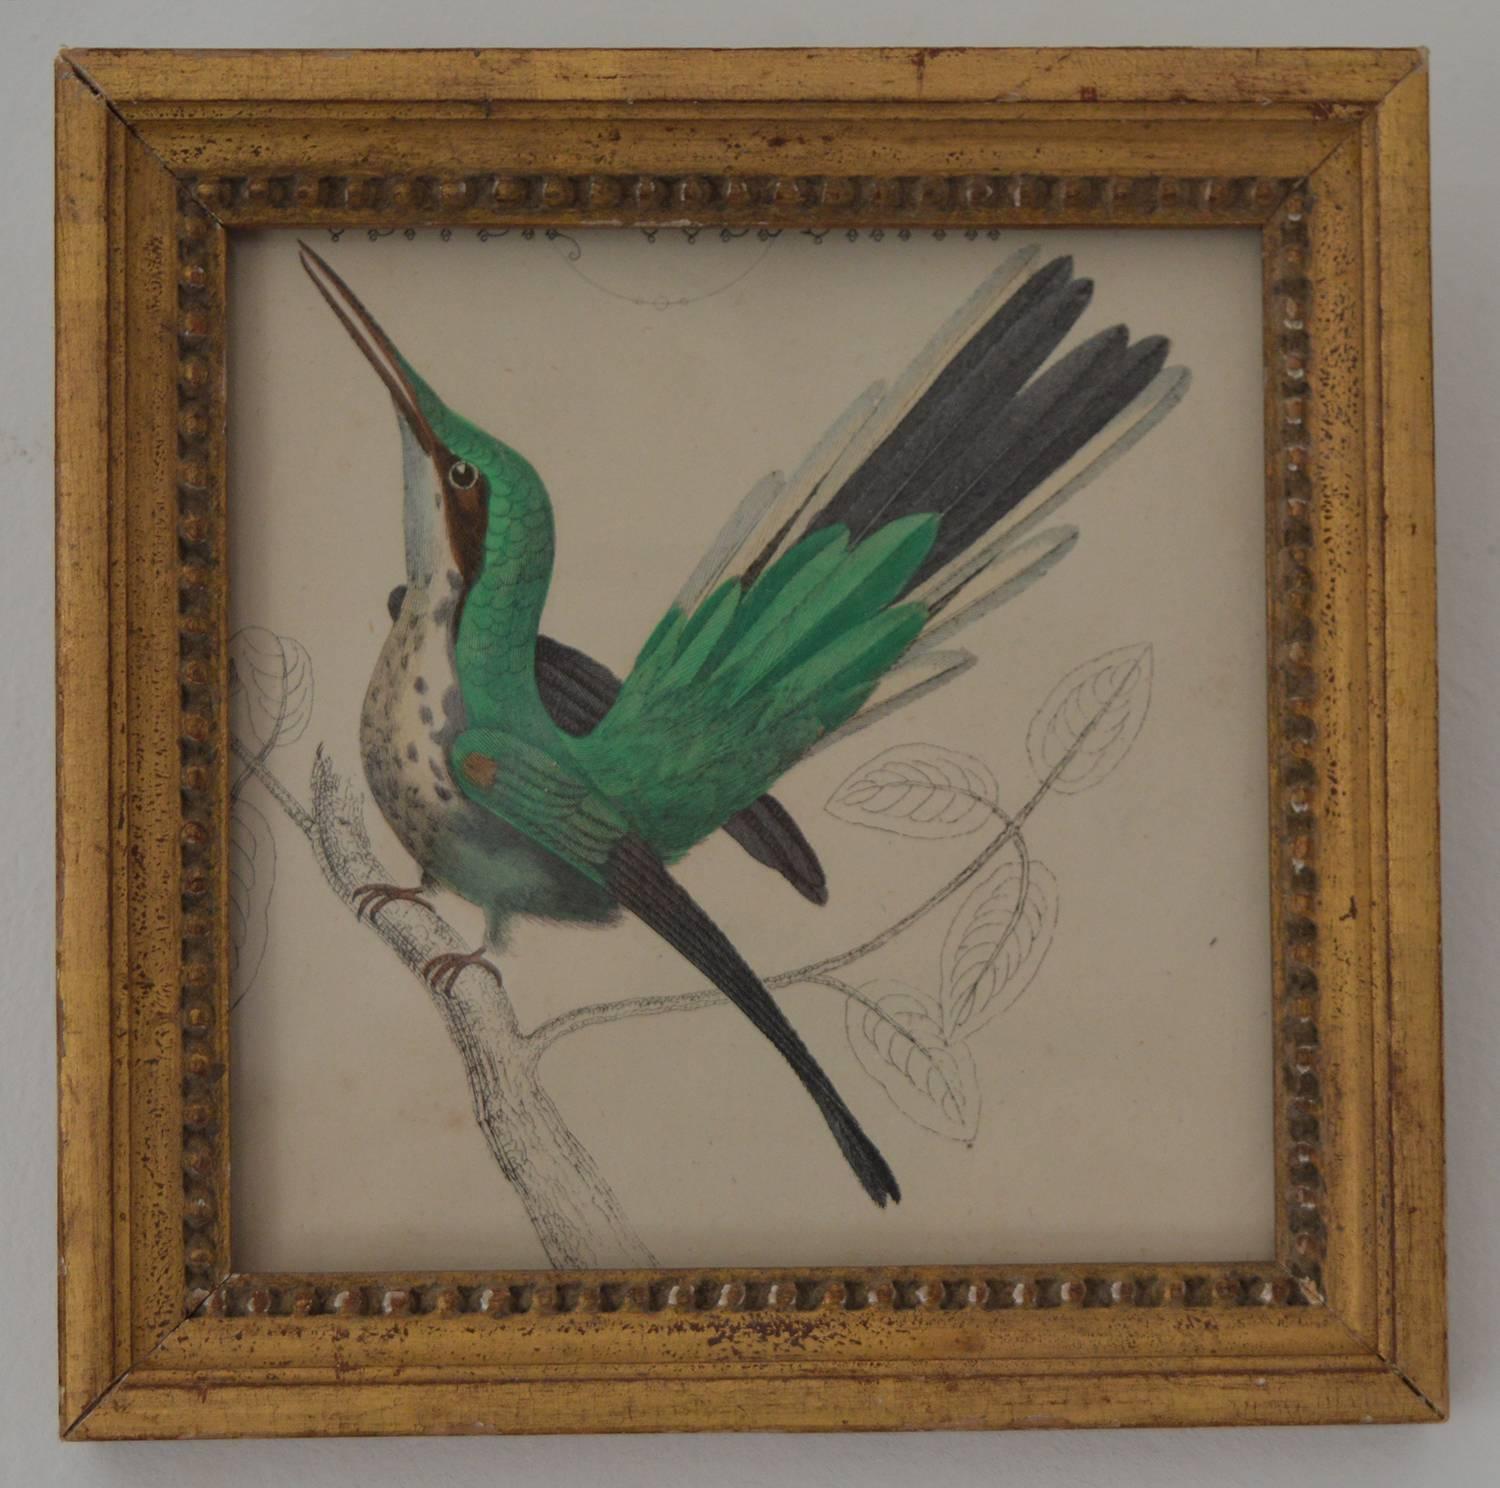 Great image of a hummingbird.

Hand-colored lithograph.

Original color.

From Goldsmith's Animated Nature.

Published by Fullarton, London and Edinburgh, 1847.

Presented in antique gilt frame.

The measurement given below is the frame size.

  